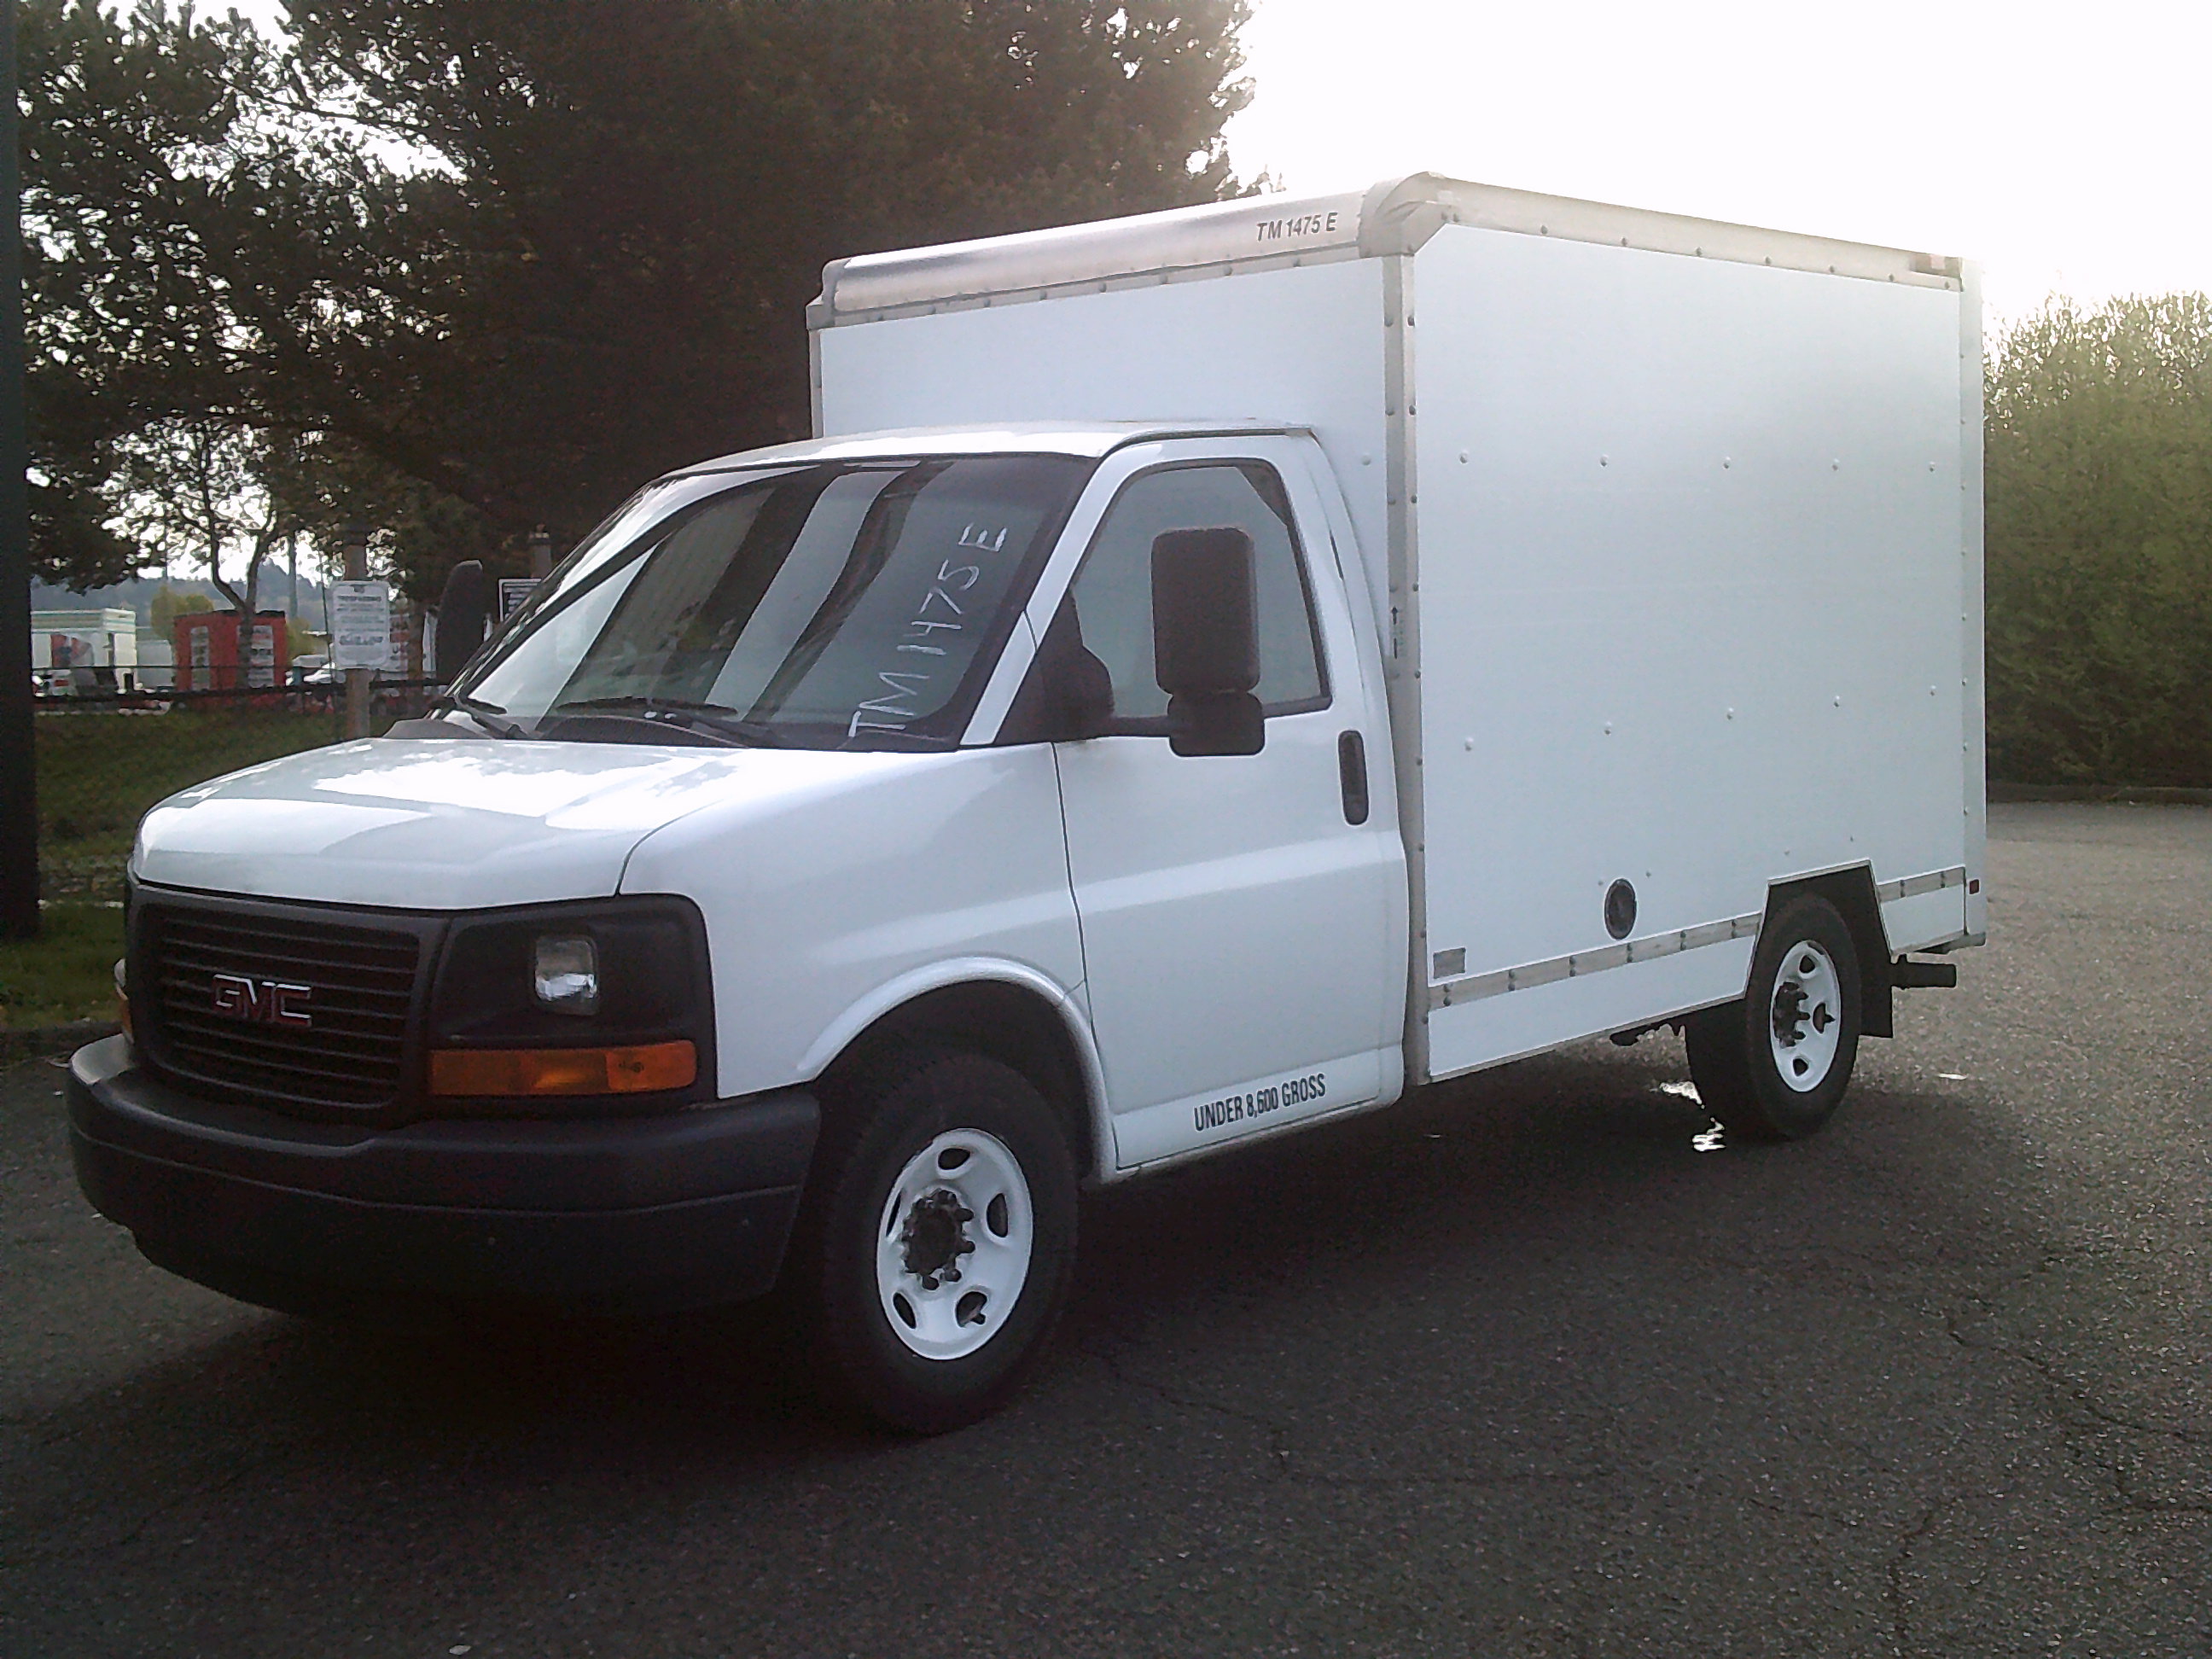 Used 2013 10 ' Box Truck for sale